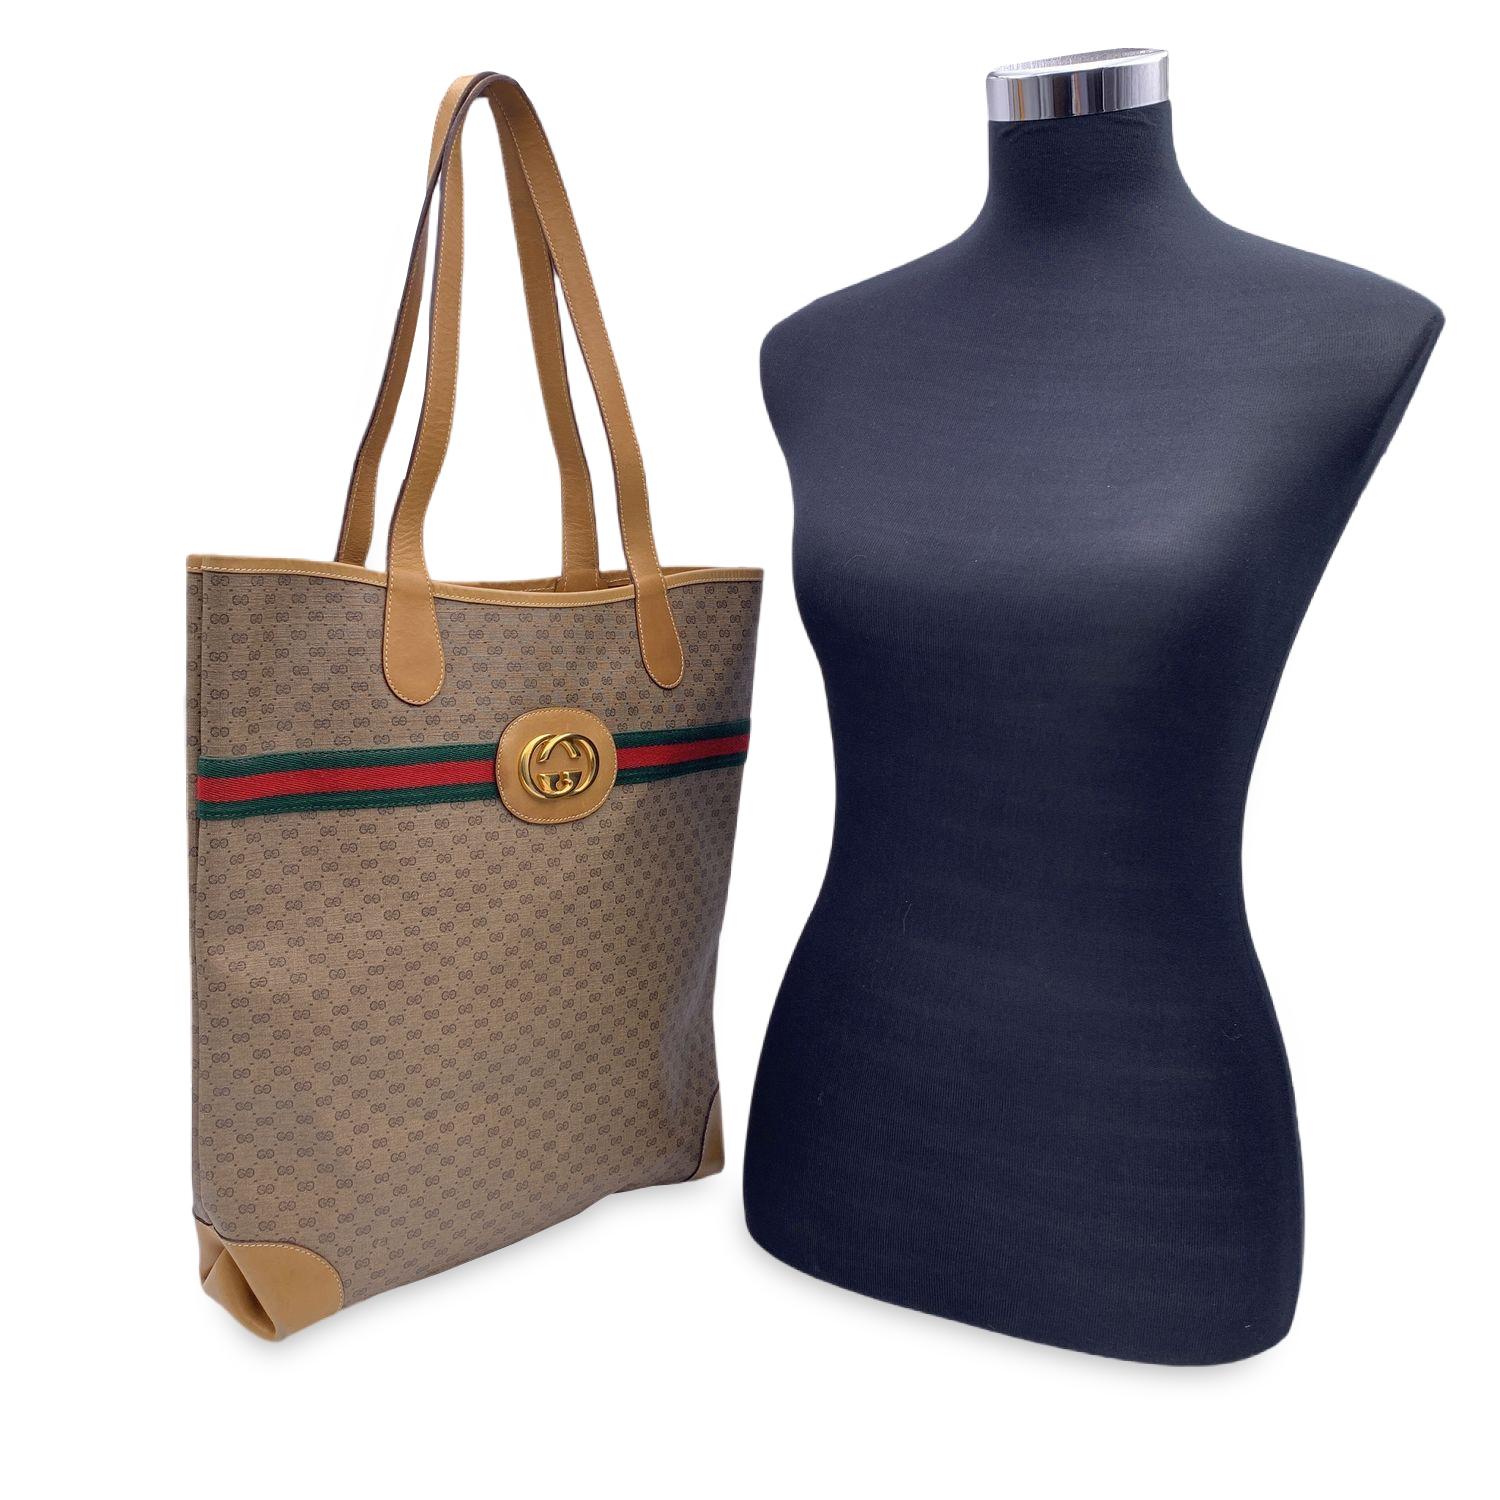 Vintage Gucci beige monogram canvas tote shopping bag with green/red/green striped detailing. Beige leather trim. Gold metal GG - GUCCI logo on the front. Open top. Beige lining. 'Gucci - Made in Italy' tag (with serial number on its